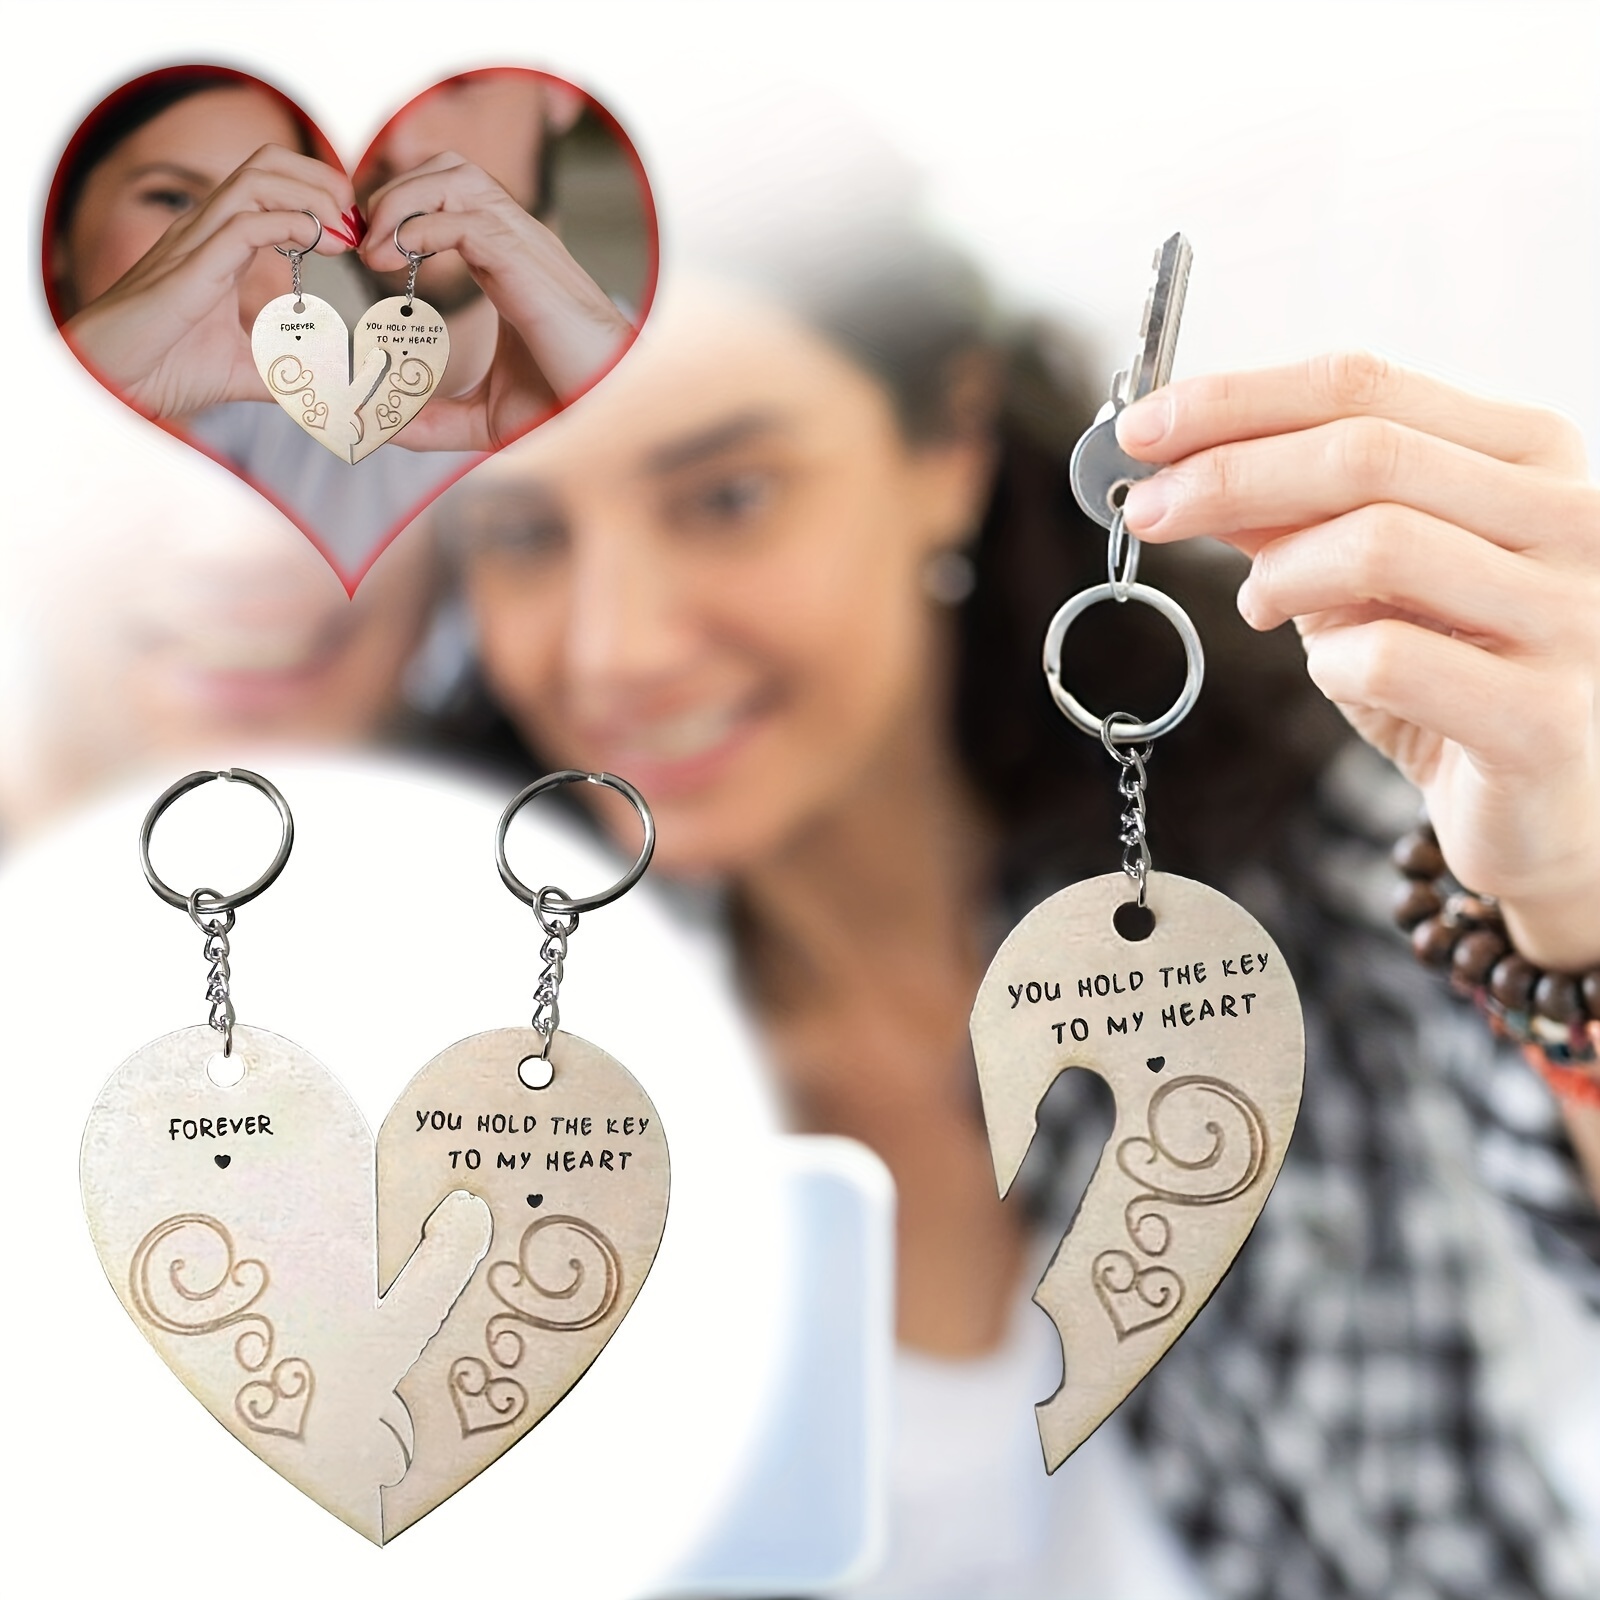  Valentines Day Gifts for Boyfriend from Girlfriend Husband  Valentines Gifts from Wife Funny Gifts for Boyfriend from Girlfriend  Anniversary Wedding Gifts for Couples Him Wedding Gifts Keychain for Men :  Office